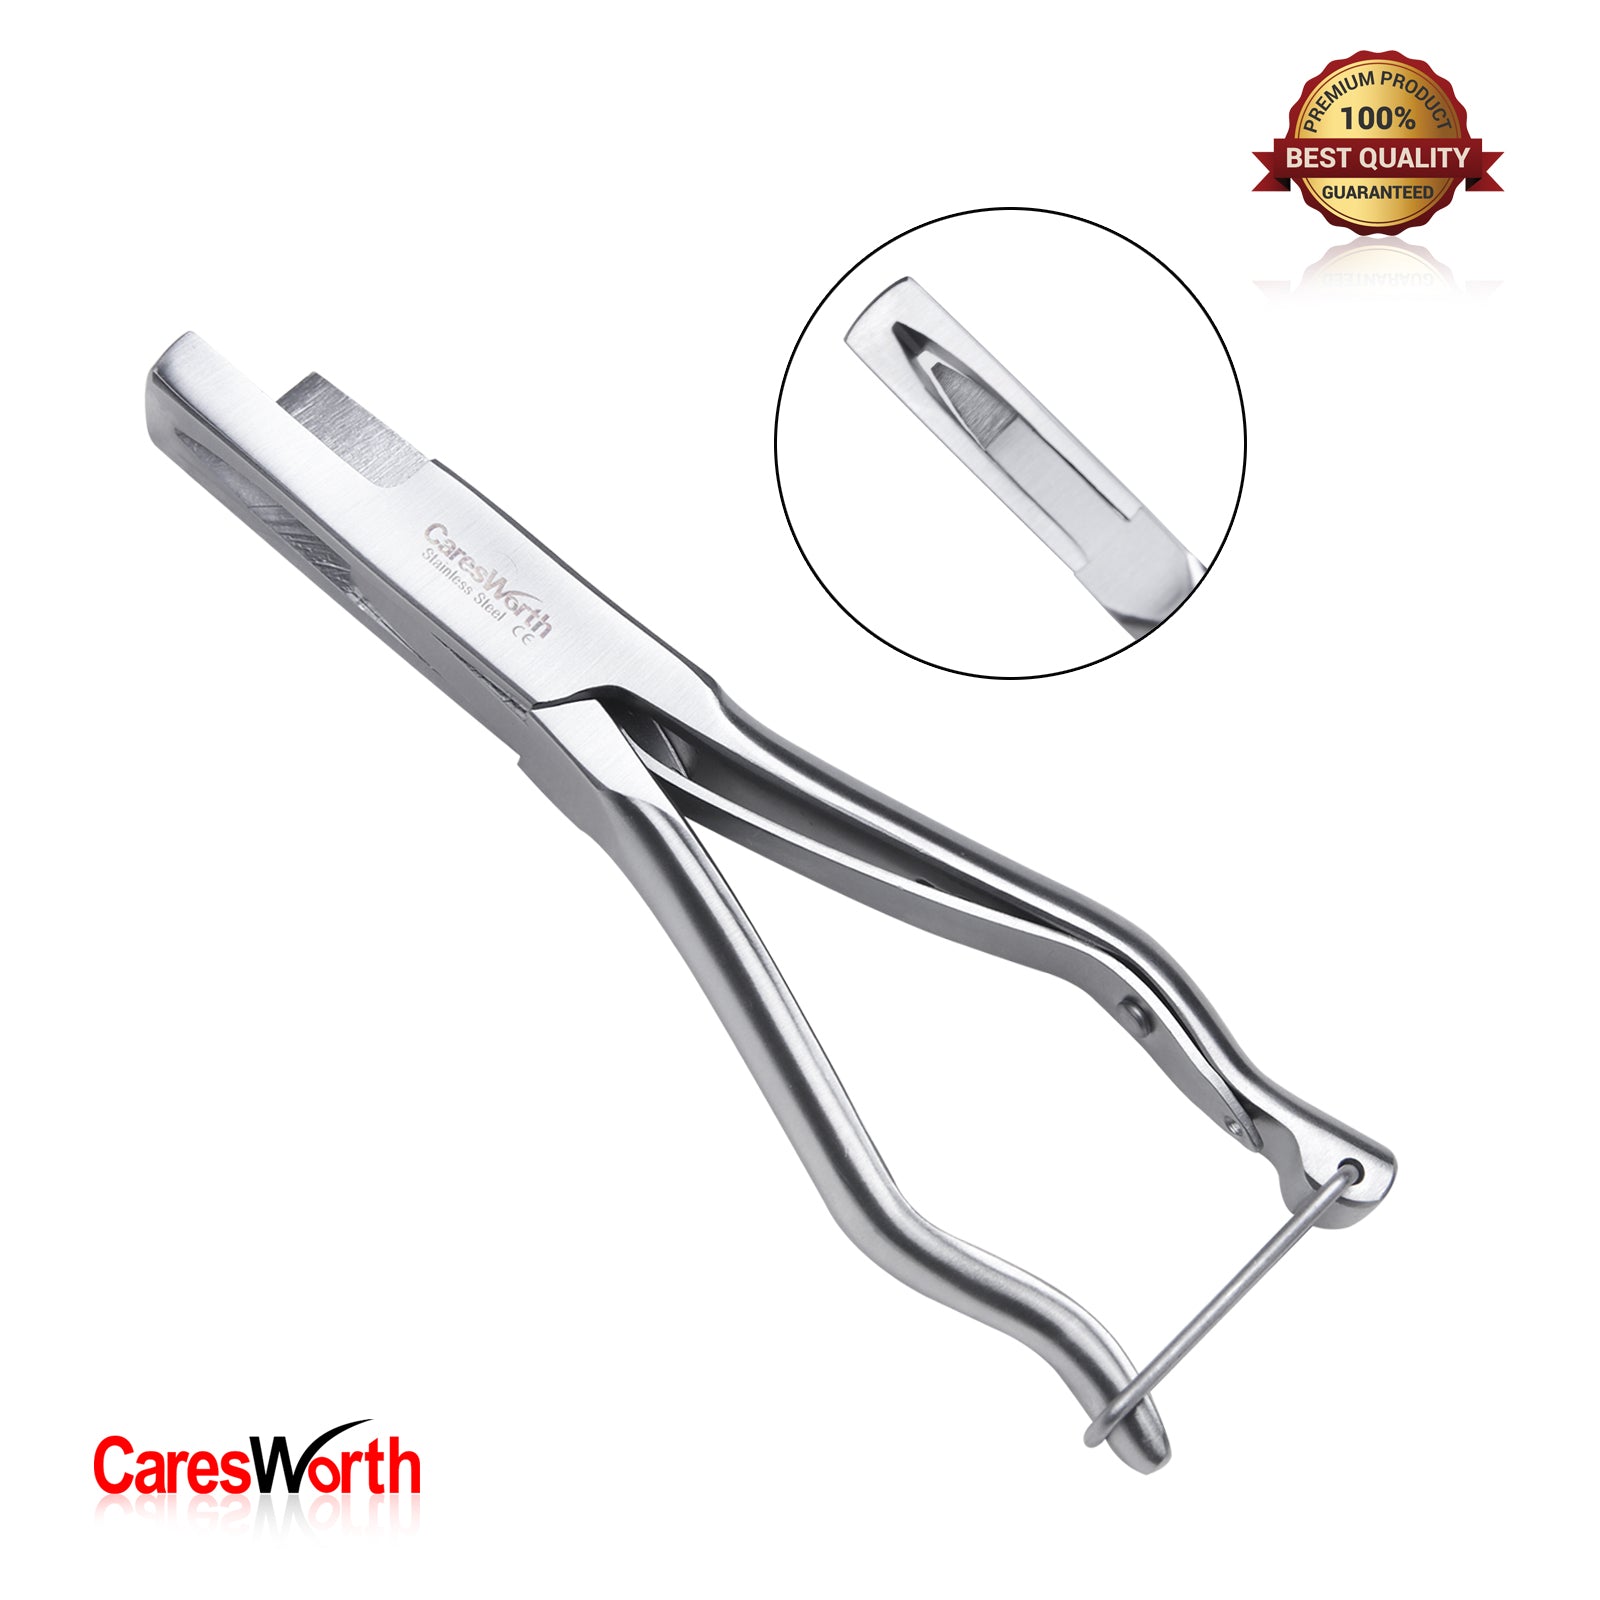 Sheep Cow Pig Ear Notcher Stainless Steel Heavy Duty Box Joint with Lock Veterinary Equipment, U & V Shapes Veterinary Farm Instrument CE